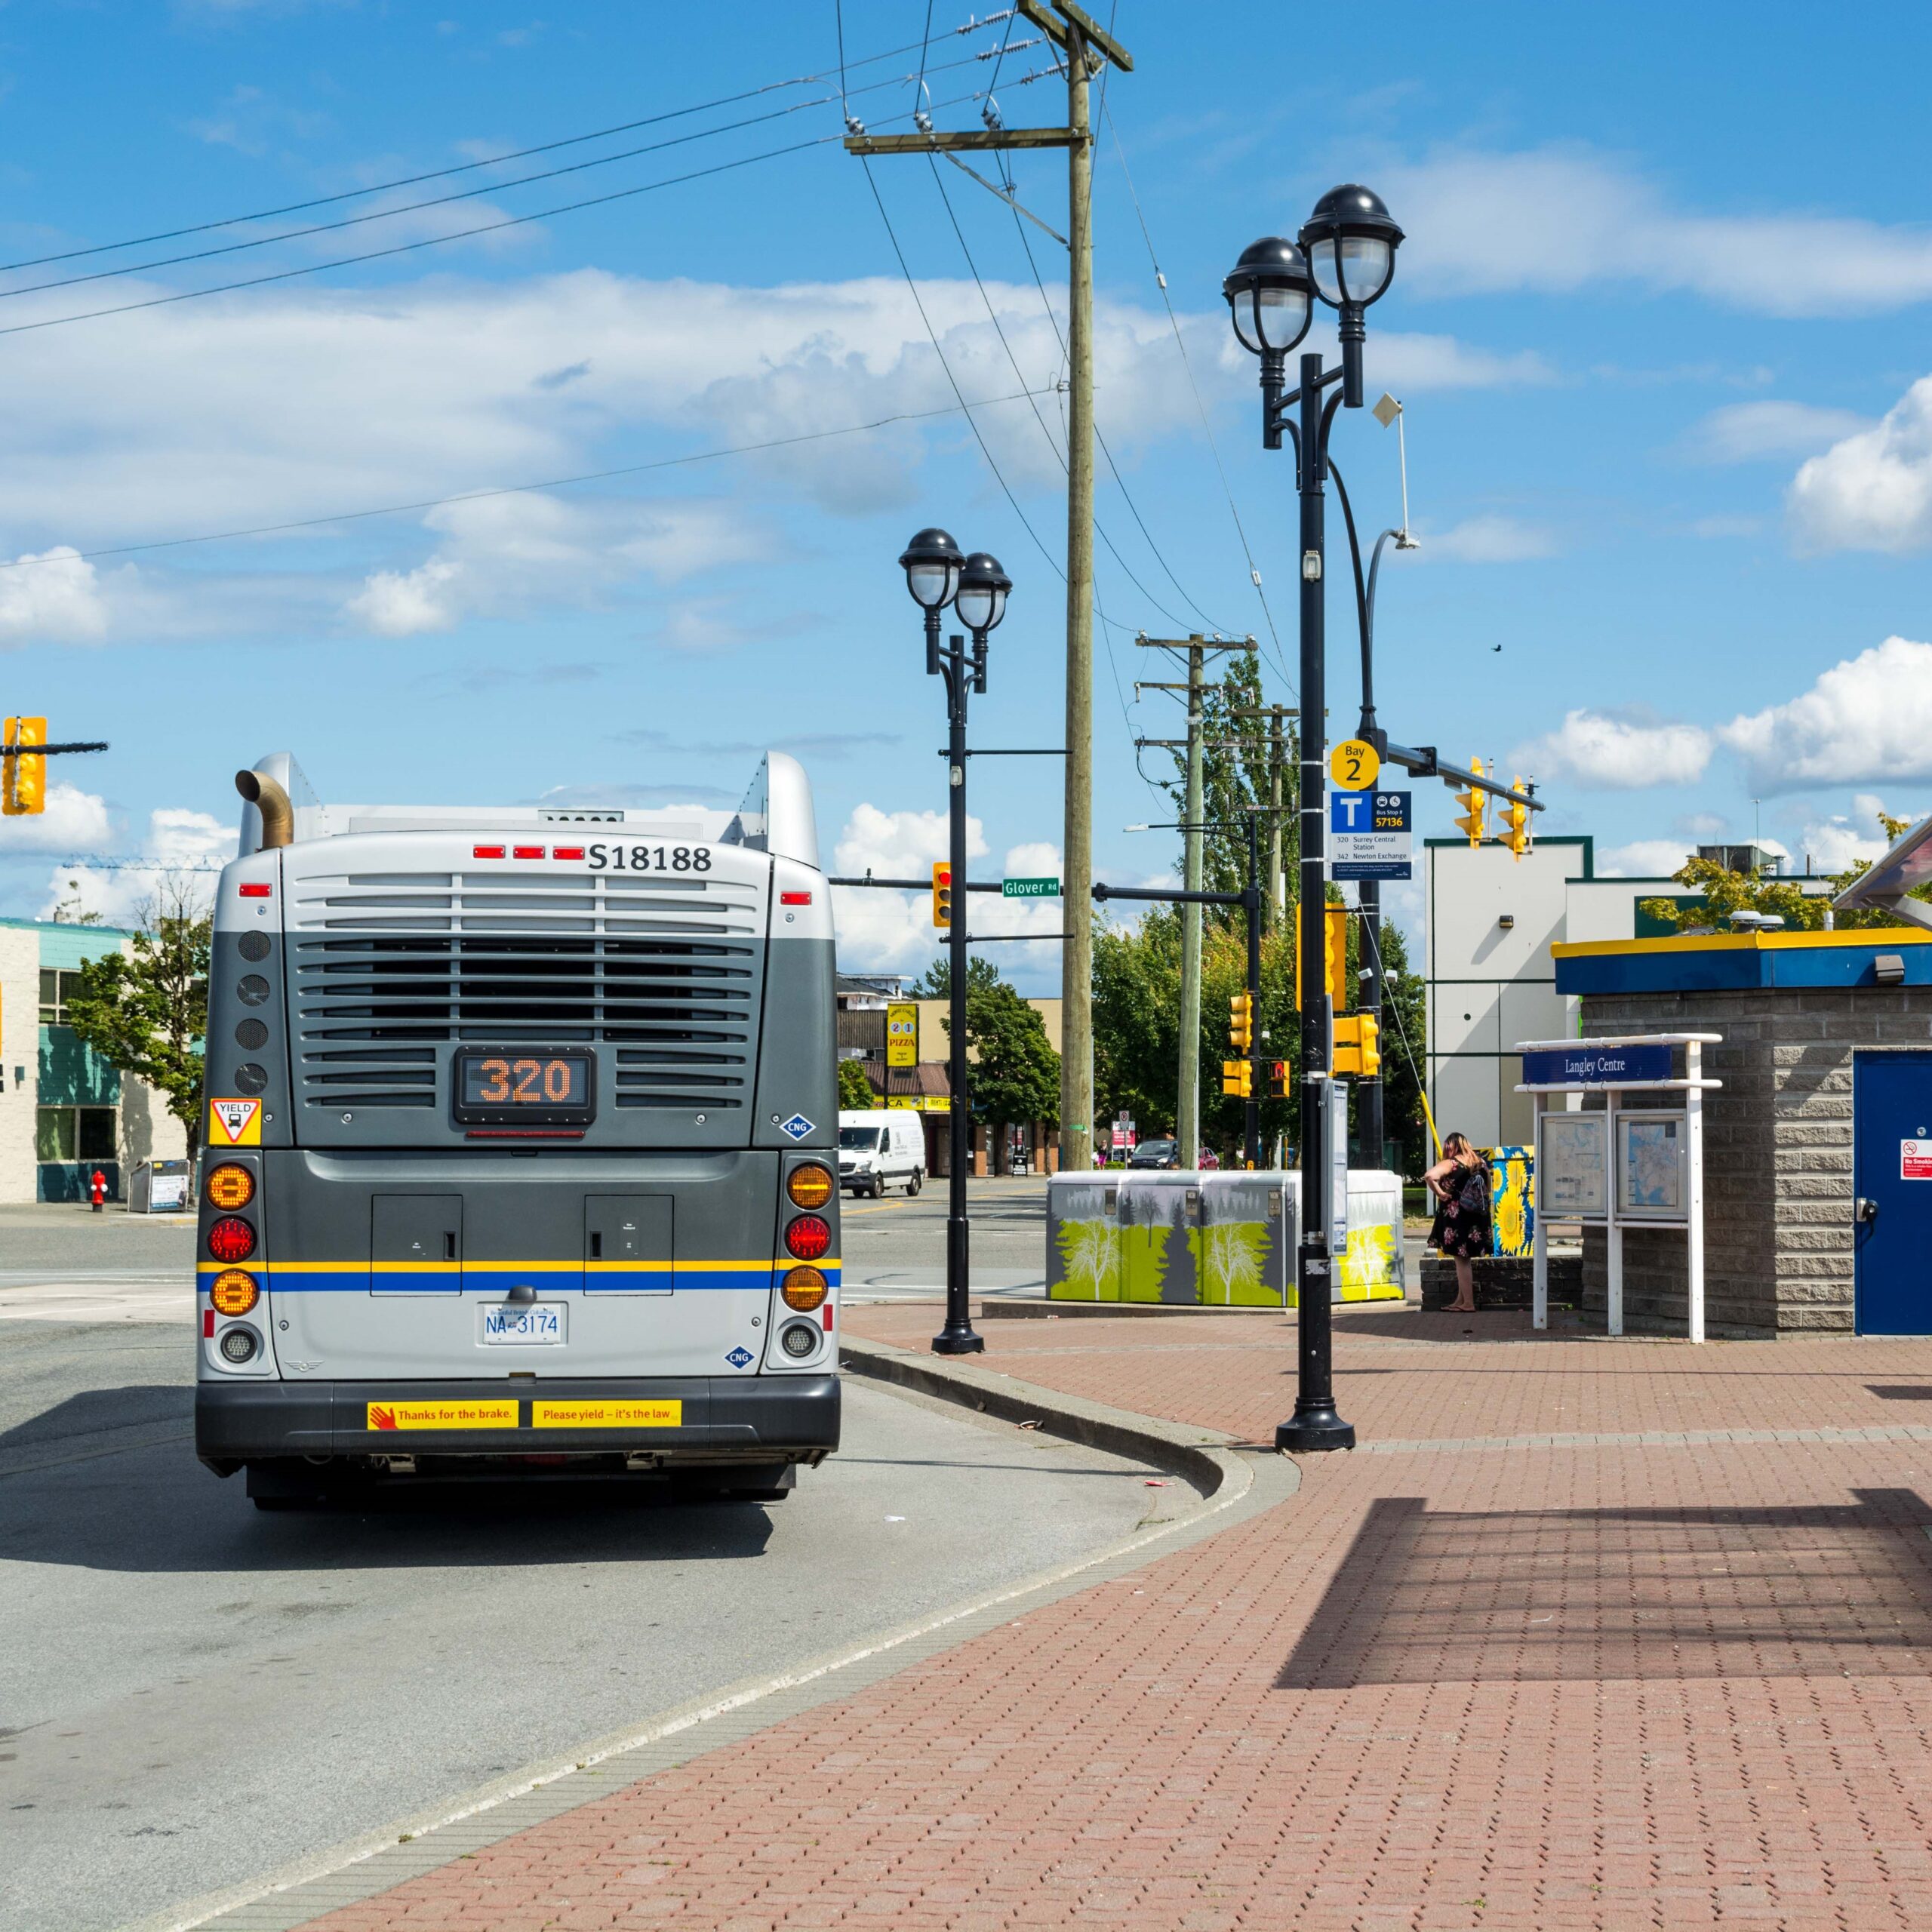 The rear of a TransLink bus on route 320 leaves the Langley Centre exchange.